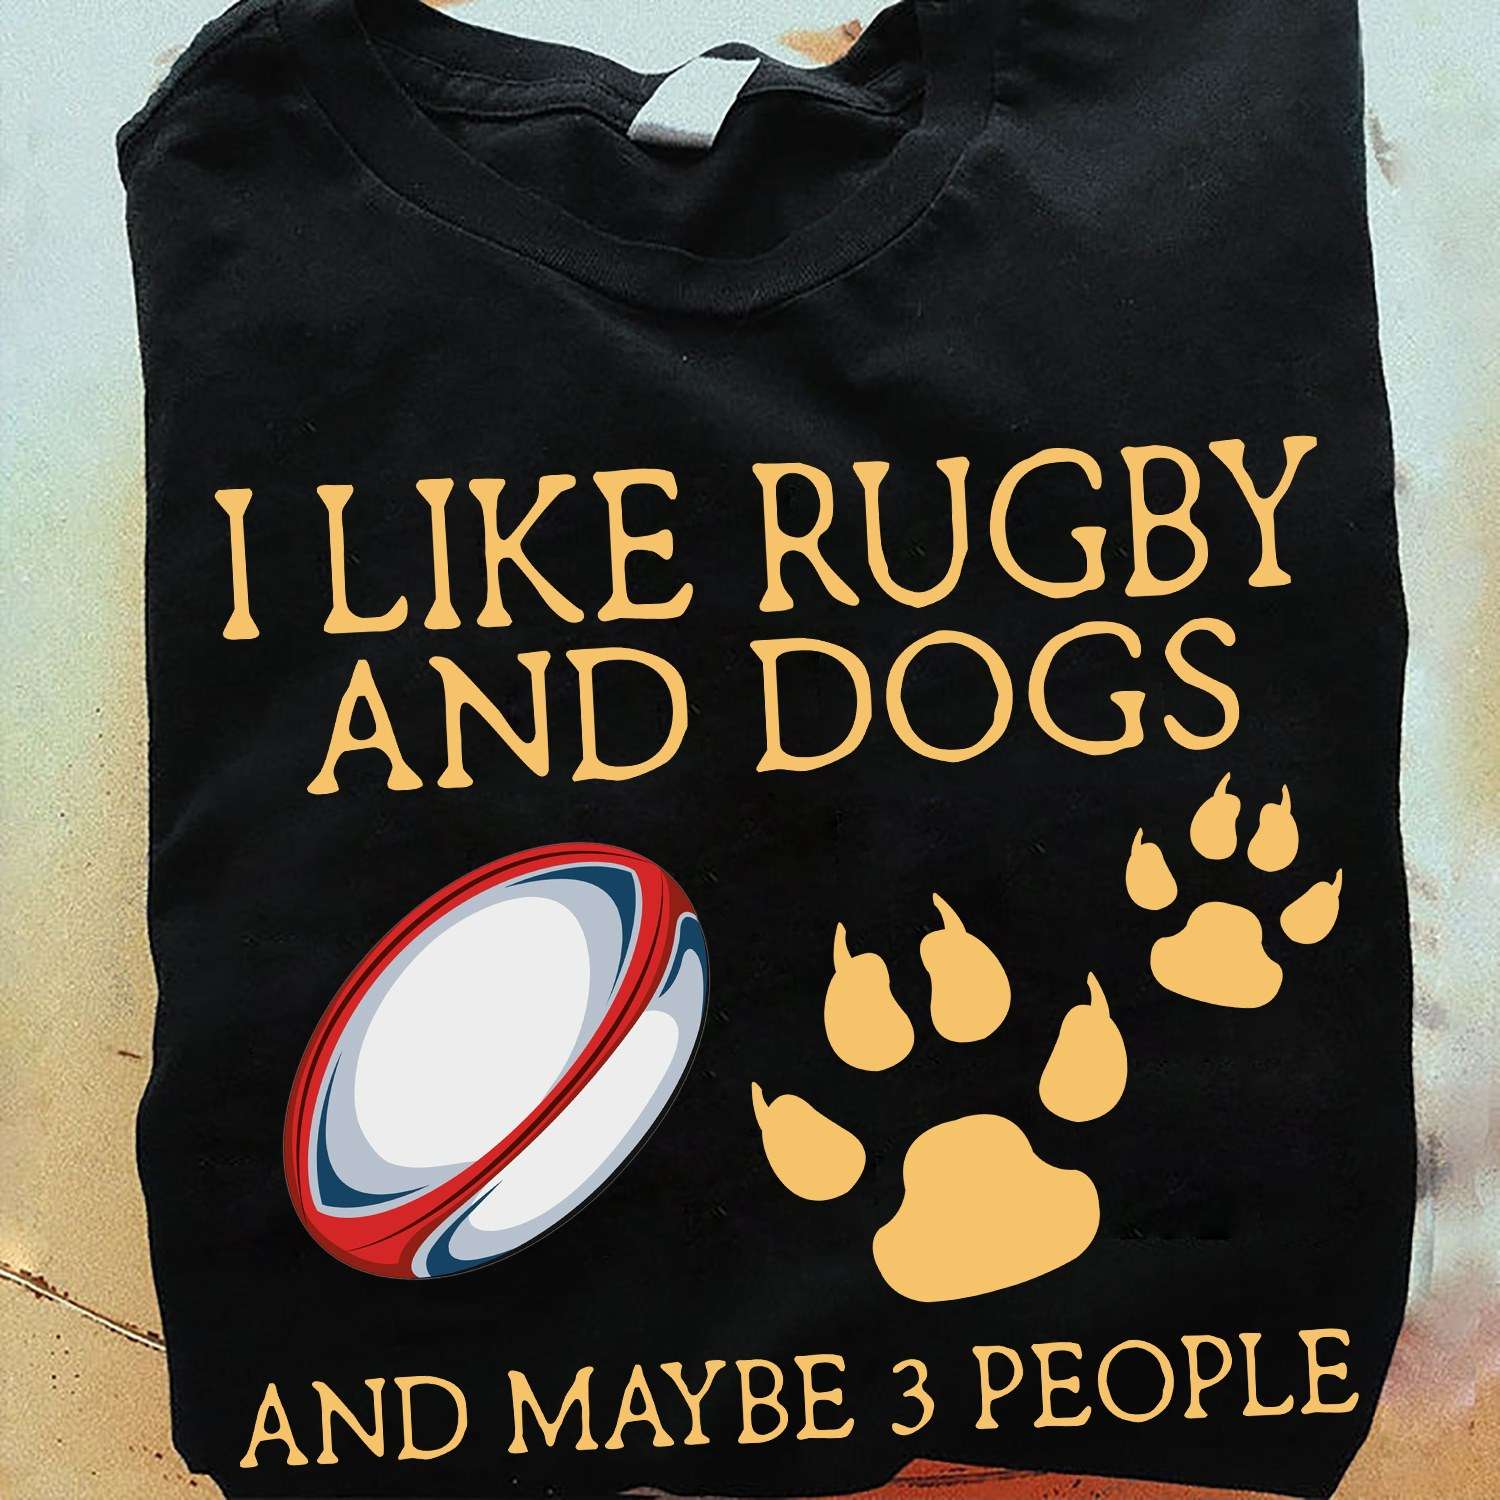 I like rugby and dogs and maybe 3 people - Rugby the sport